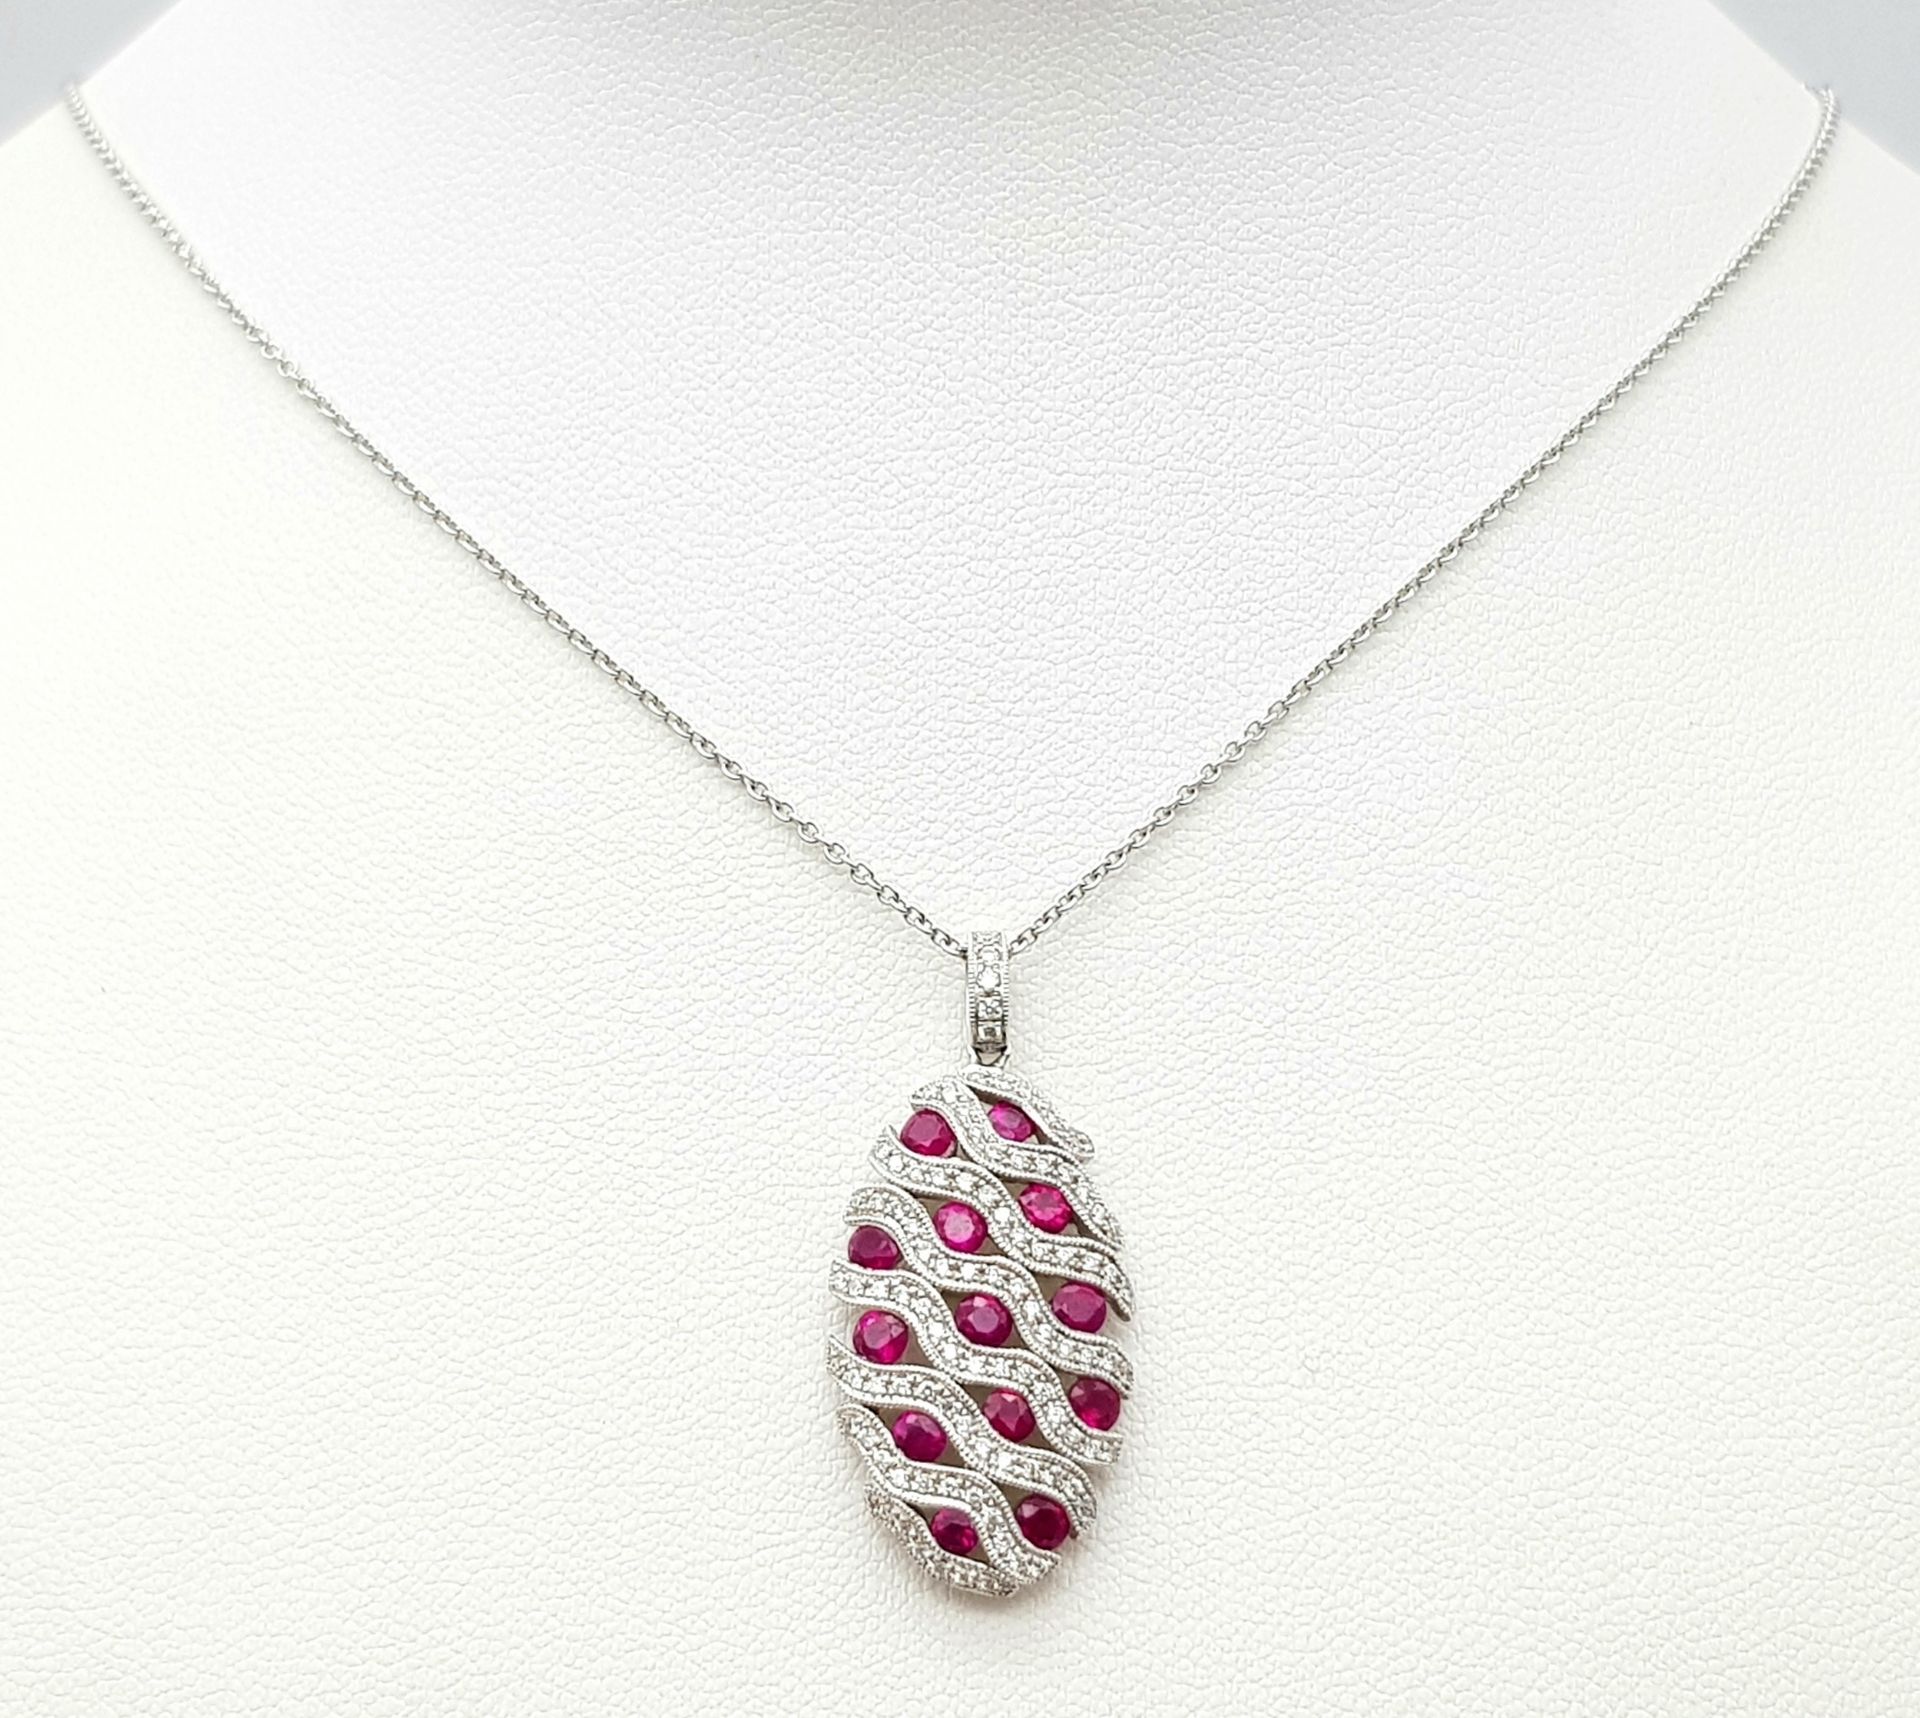 AN 18K WHITE GOLD DIAMOND AND RUBY PENDANT - 0.49CT OF DIAMONDS AND 2.29CT OF RUBIES. 6.2G WEIGHT. - Image 6 of 16